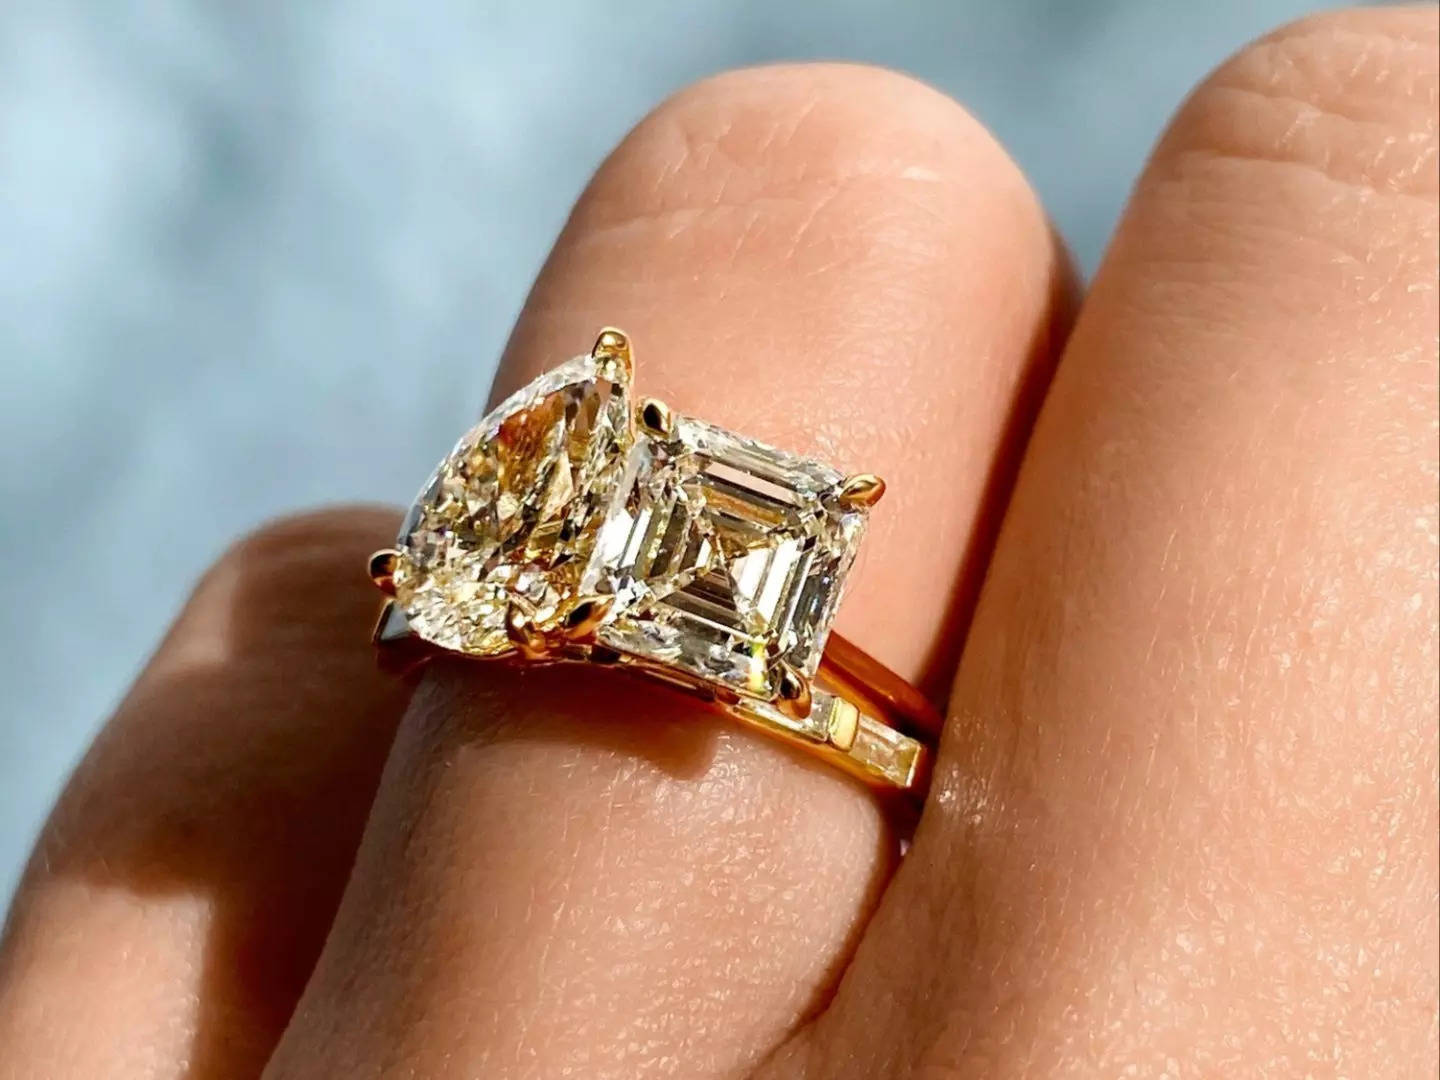 Ode to a moval diamond ring: Lang Antiques' 9.55 carat beauty.